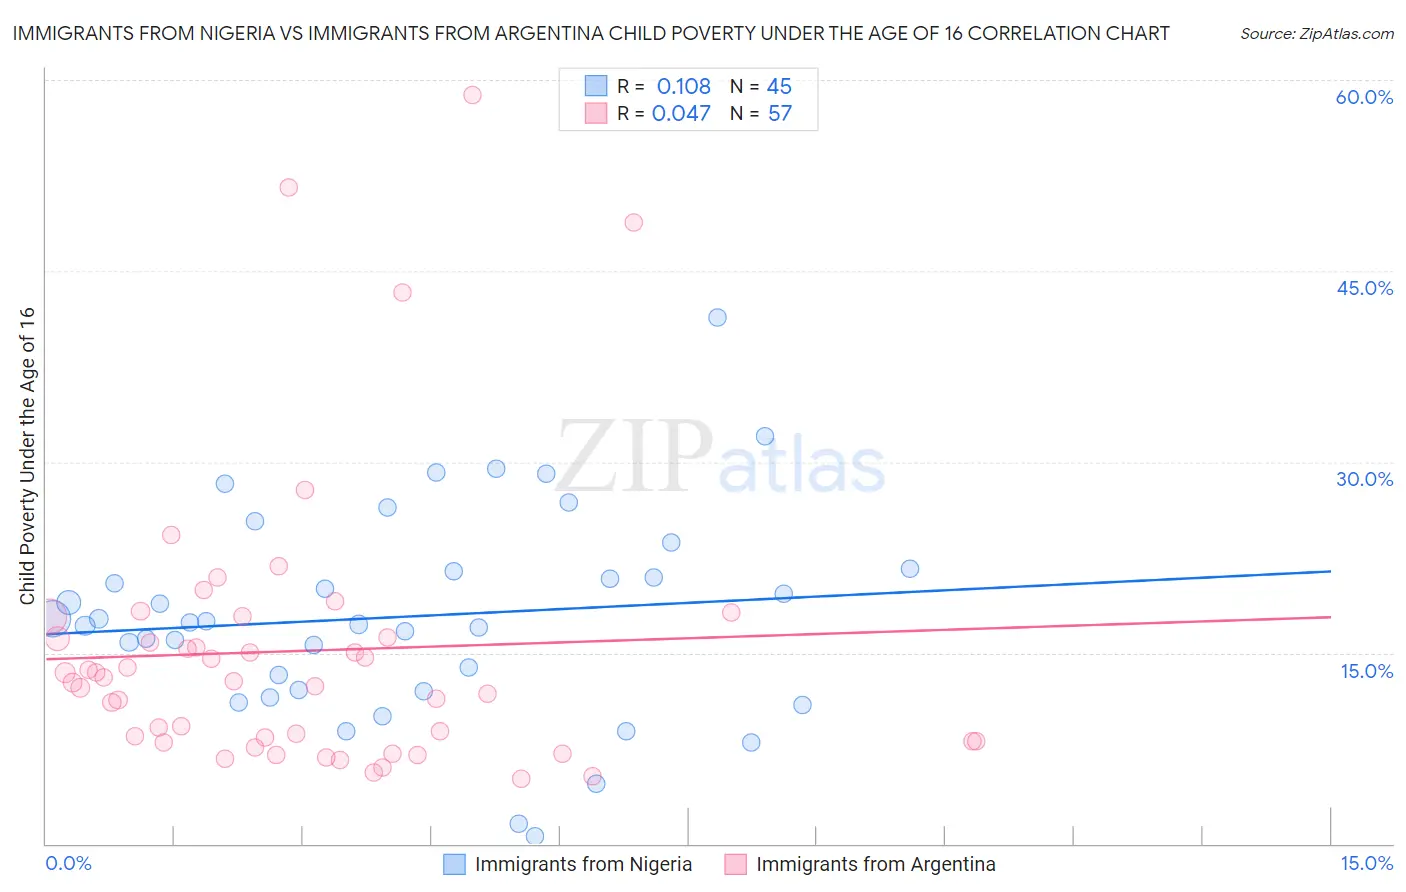 Immigrants from Nigeria vs Immigrants from Argentina Child Poverty Under the Age of 16